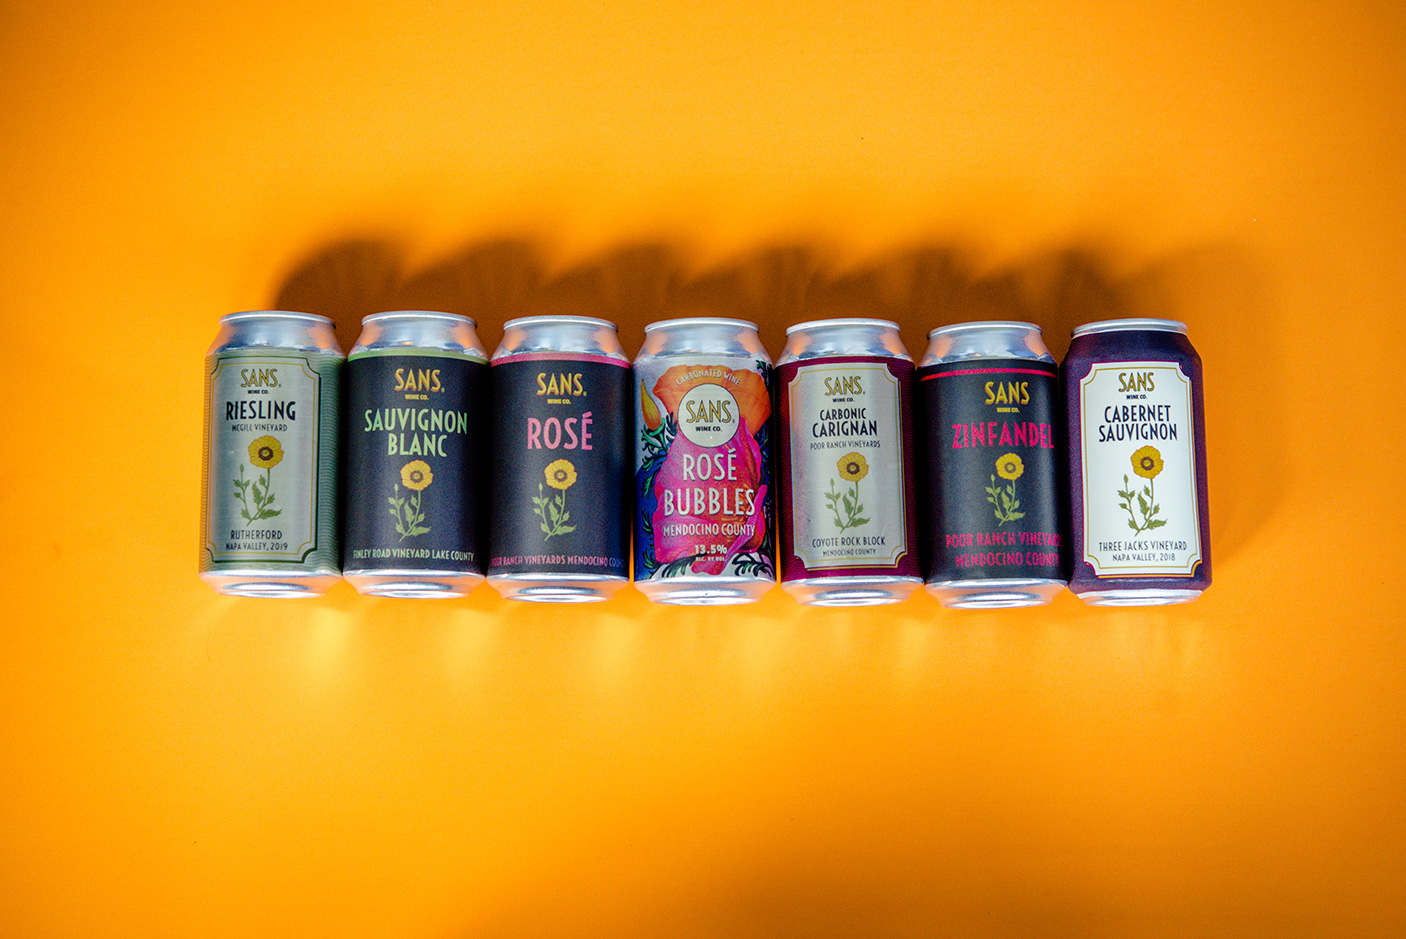 sans wine co. canned wine, natural wines